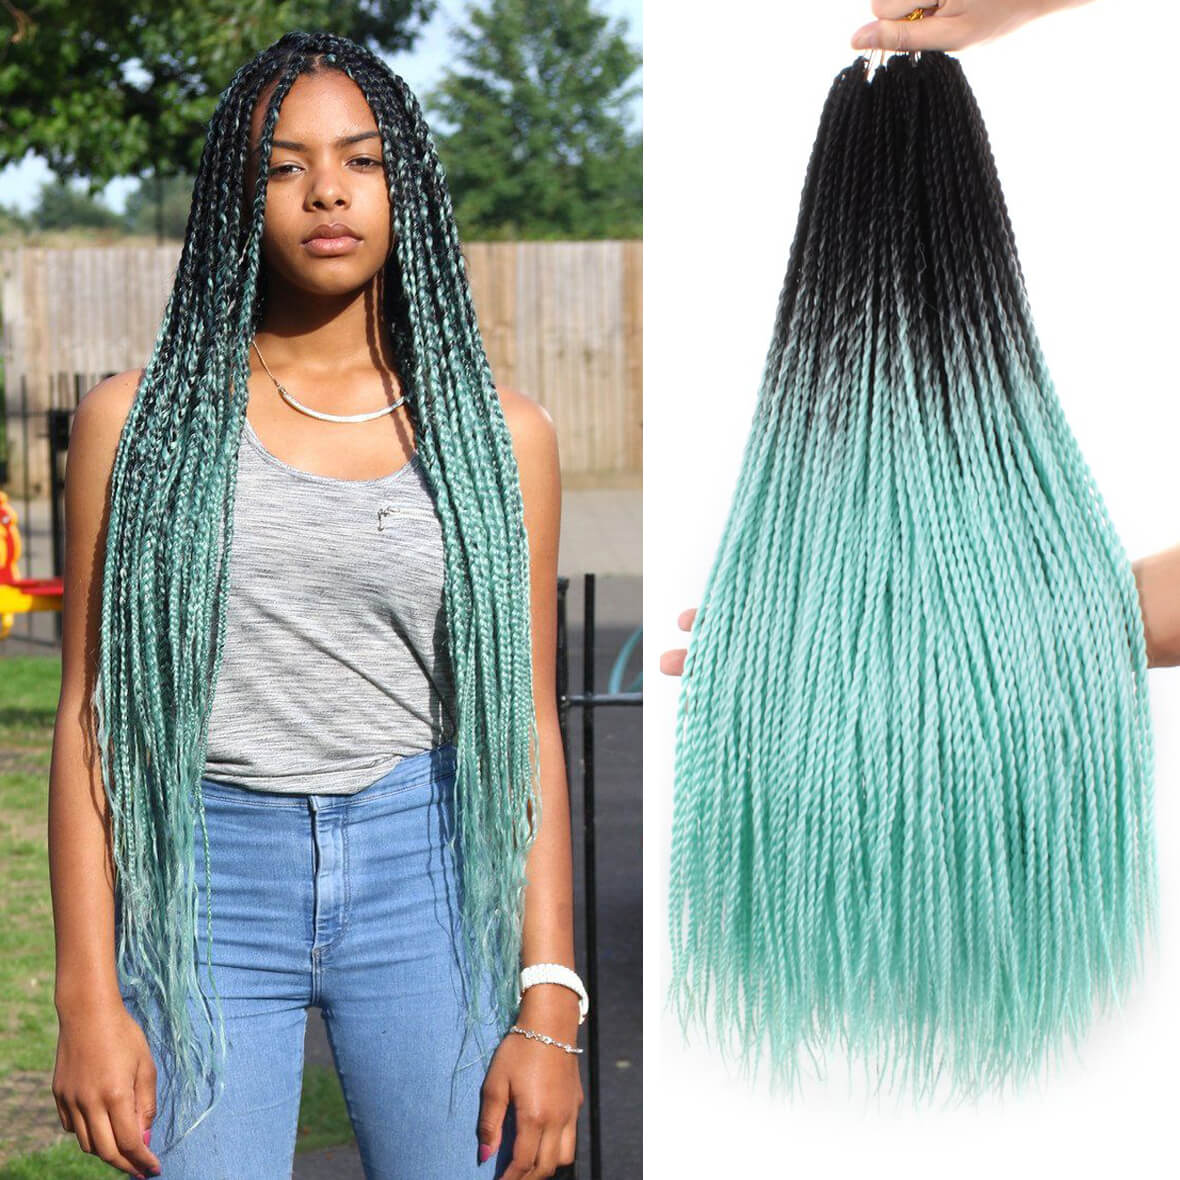 FreeTress Synthetic Hair Extension Crochet Braids - Micro Senegalese Twist